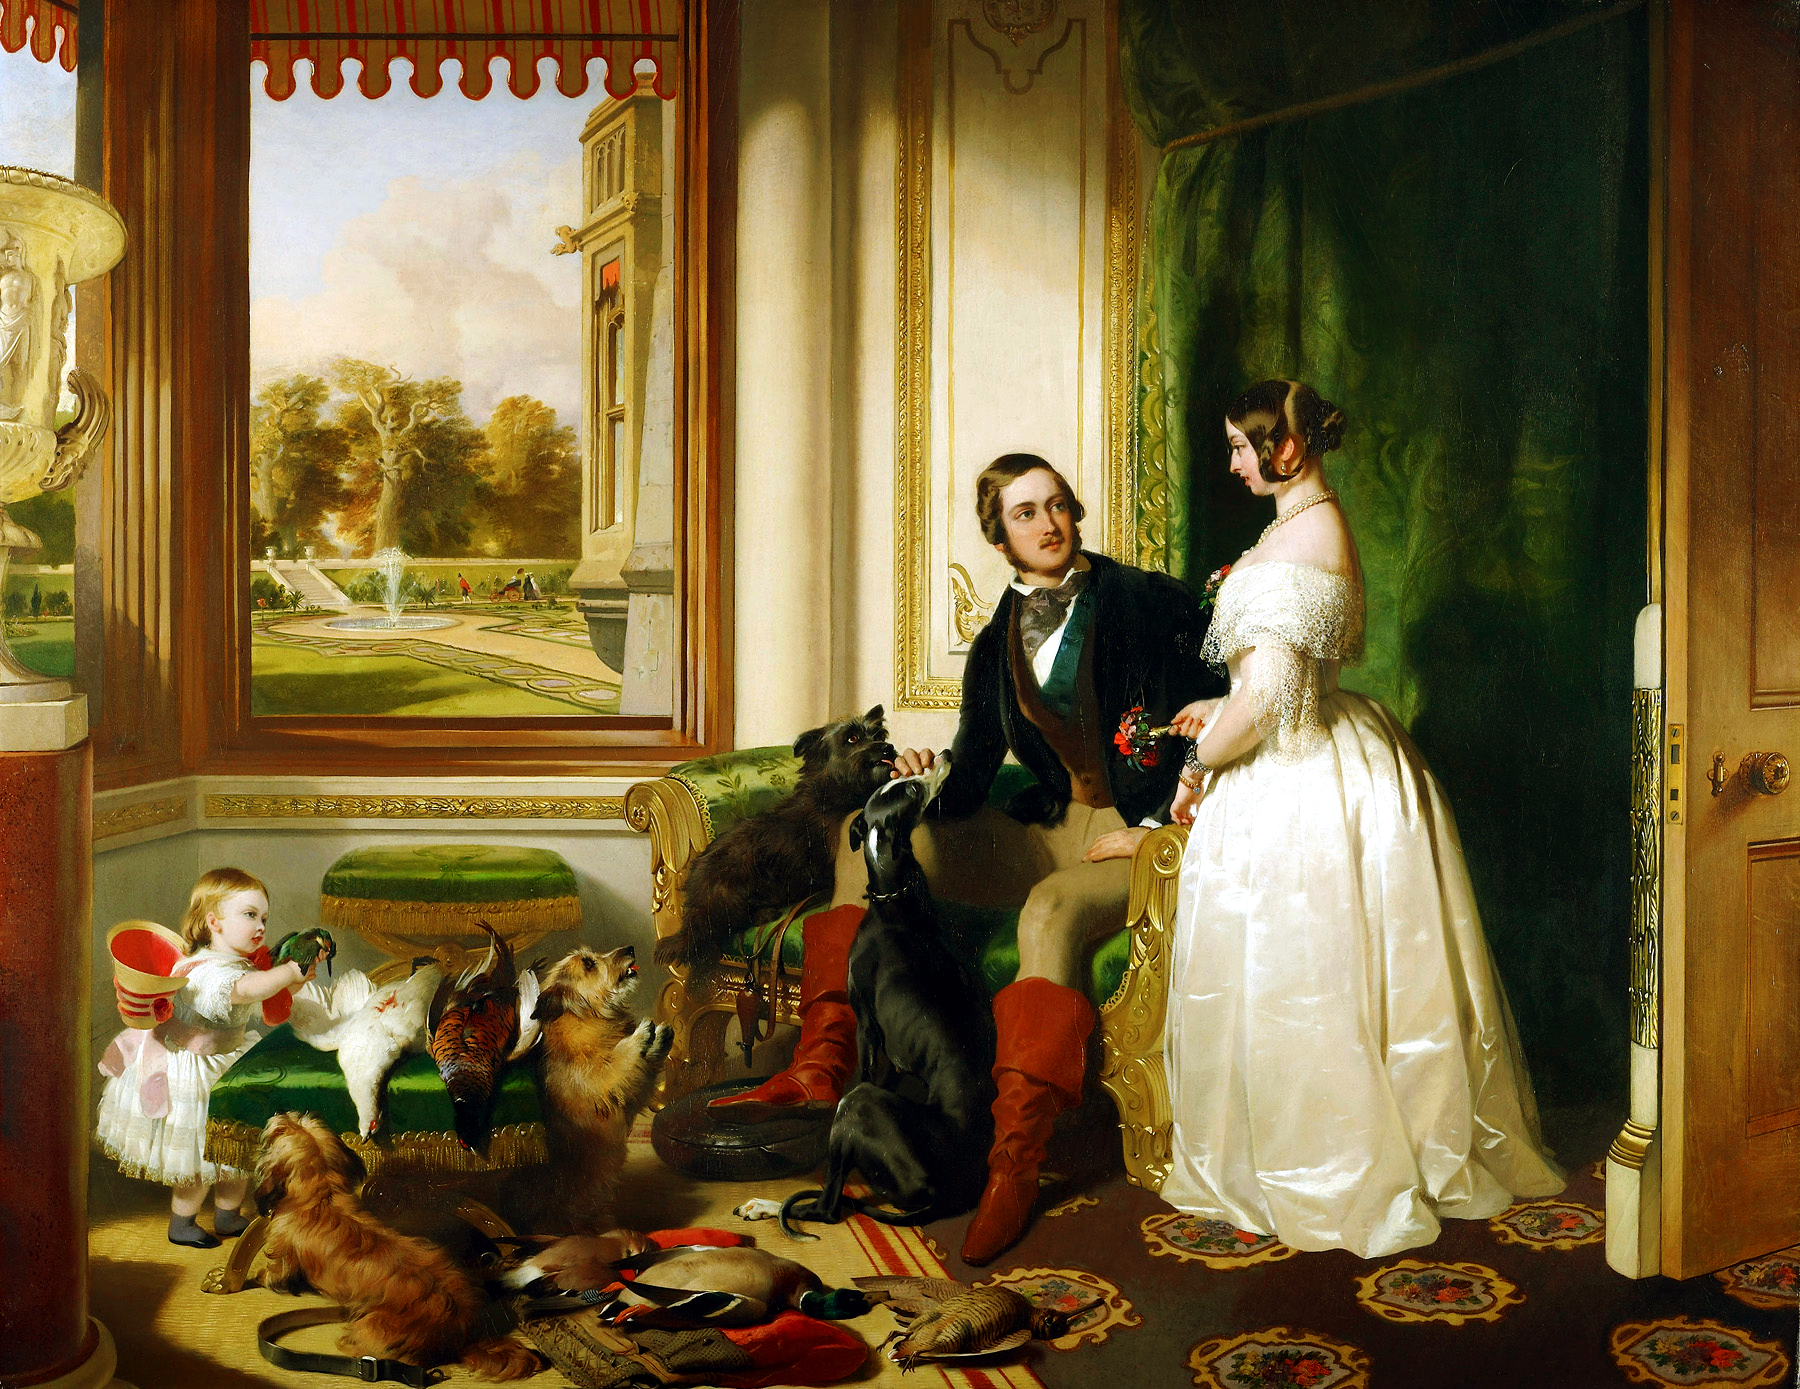 United States AI Solar System (4) - Page 9 Queen-victoria-and-prince-albert-at-home-at-windsor-castle-in-berkshire-england-1843